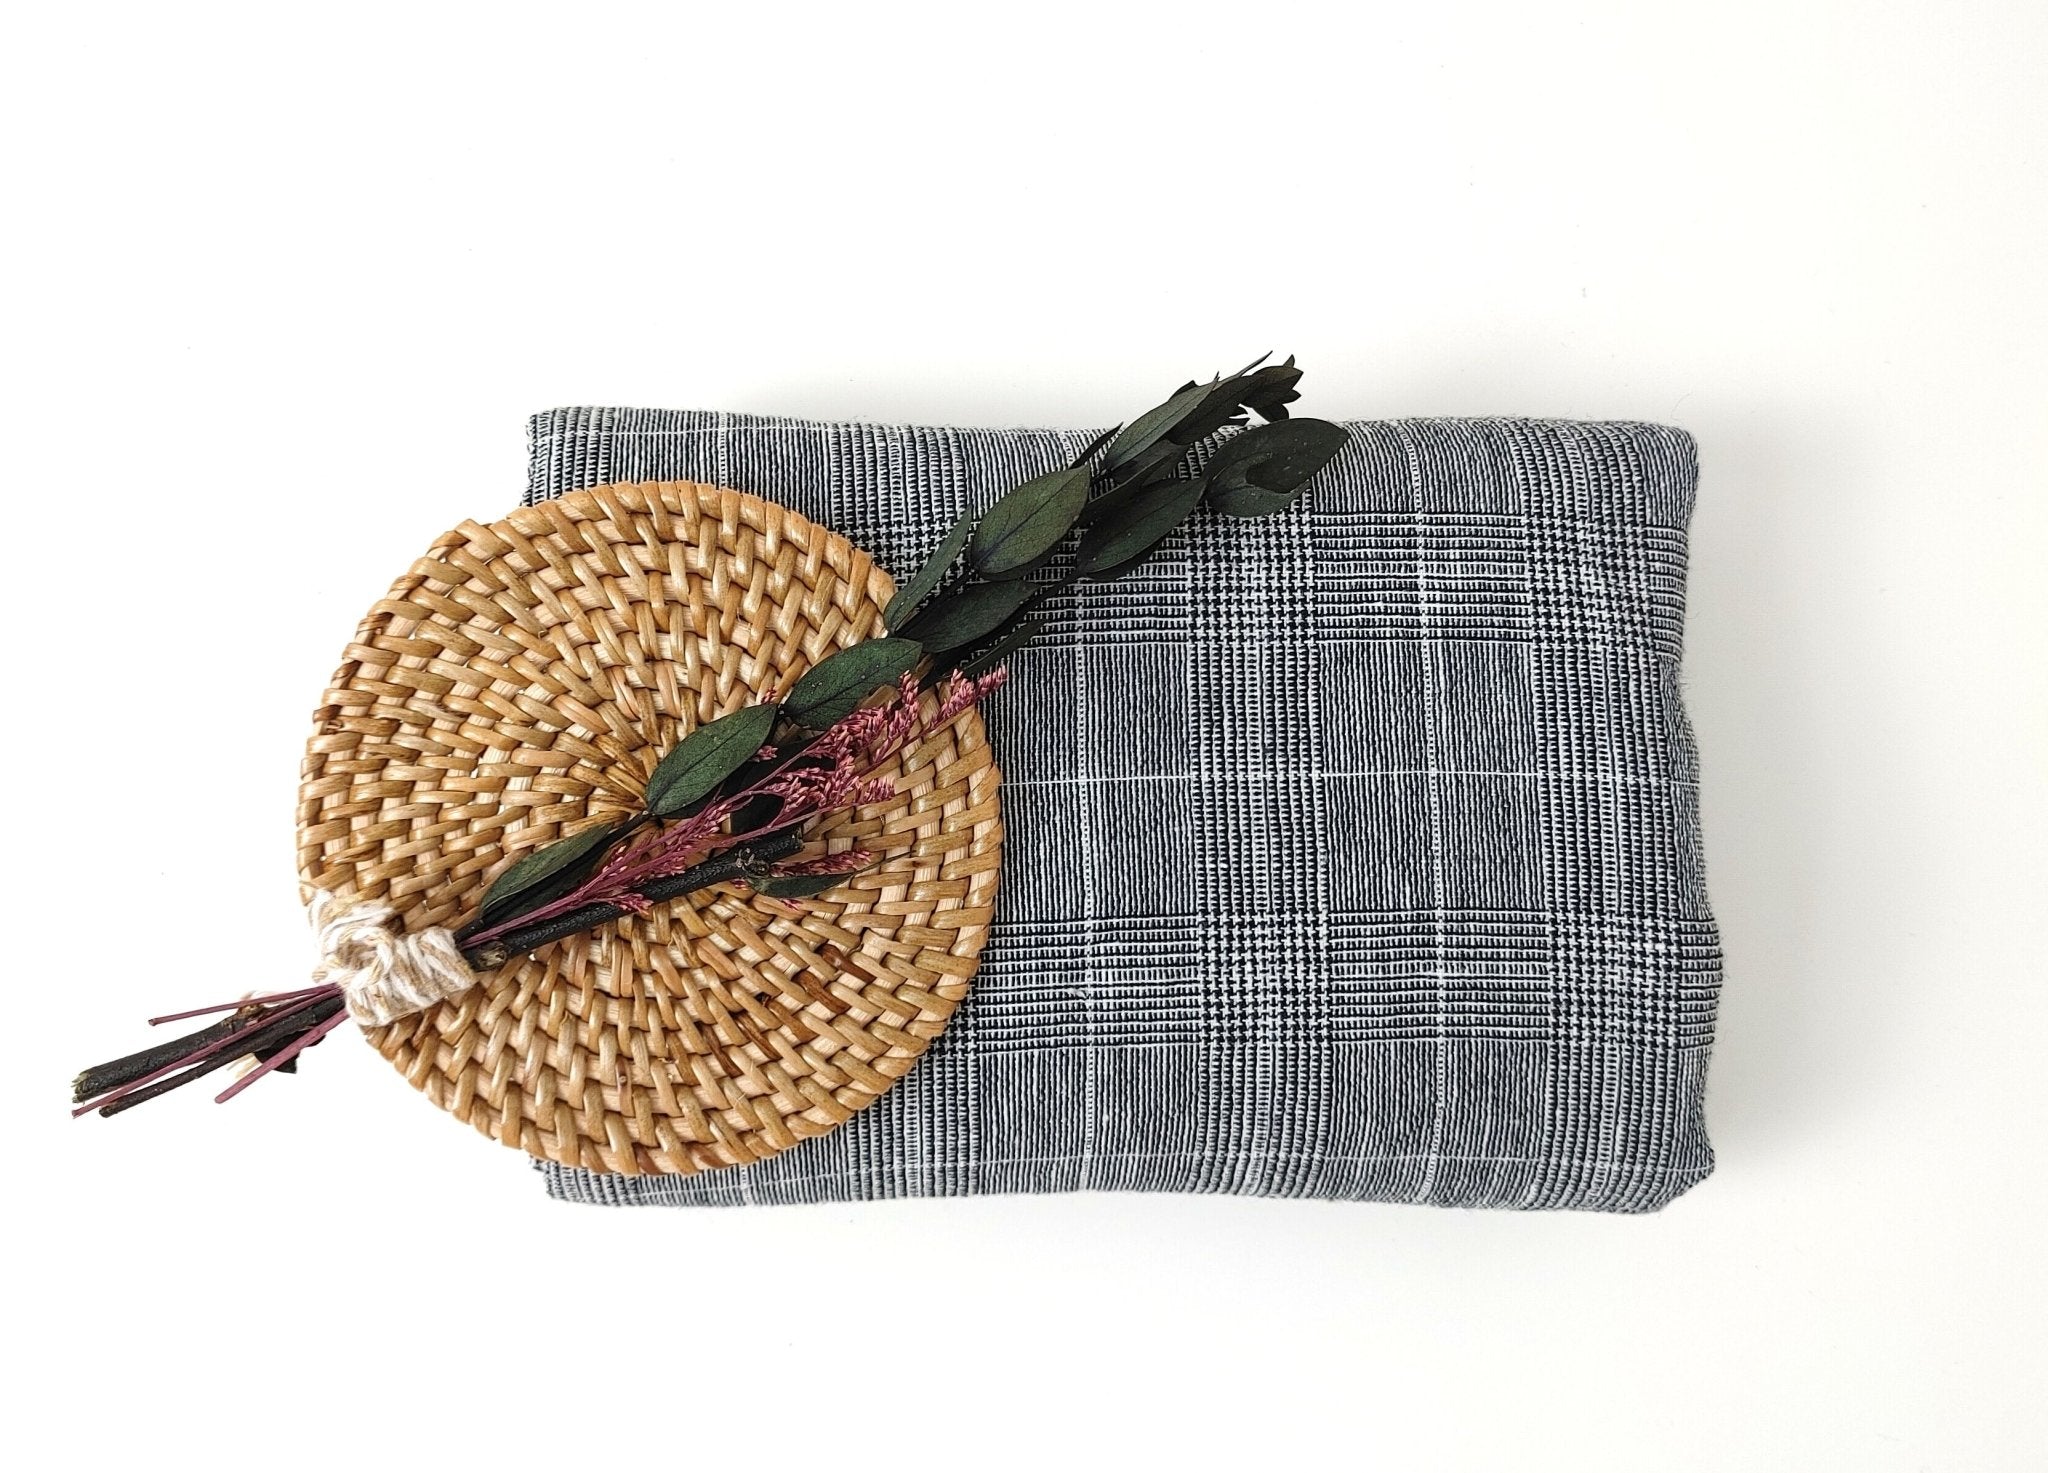 Linen Ramie Rayon Glen Plaid Fabric: A Symphony of Elegance with High Twisted Yarns 6070 - The Linen Lab - Black